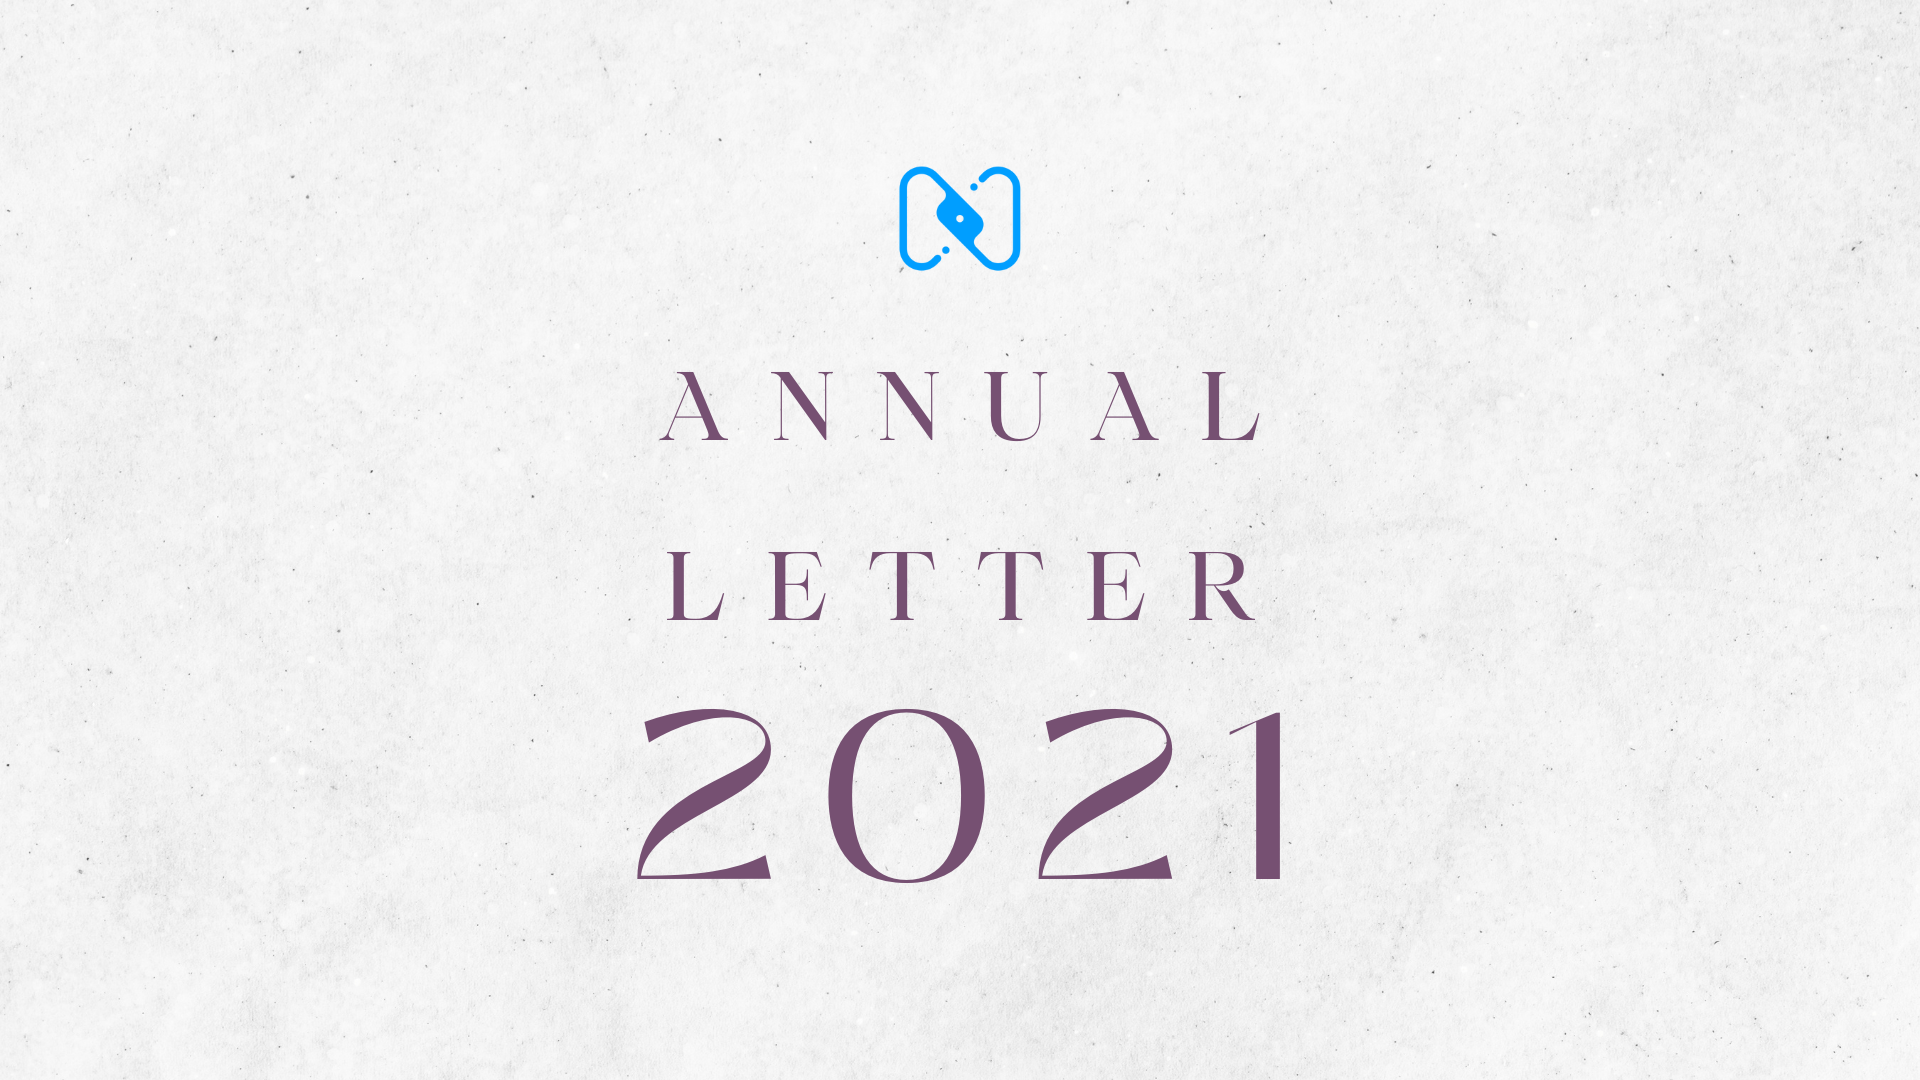 Nuclei's Annual Letter 2021